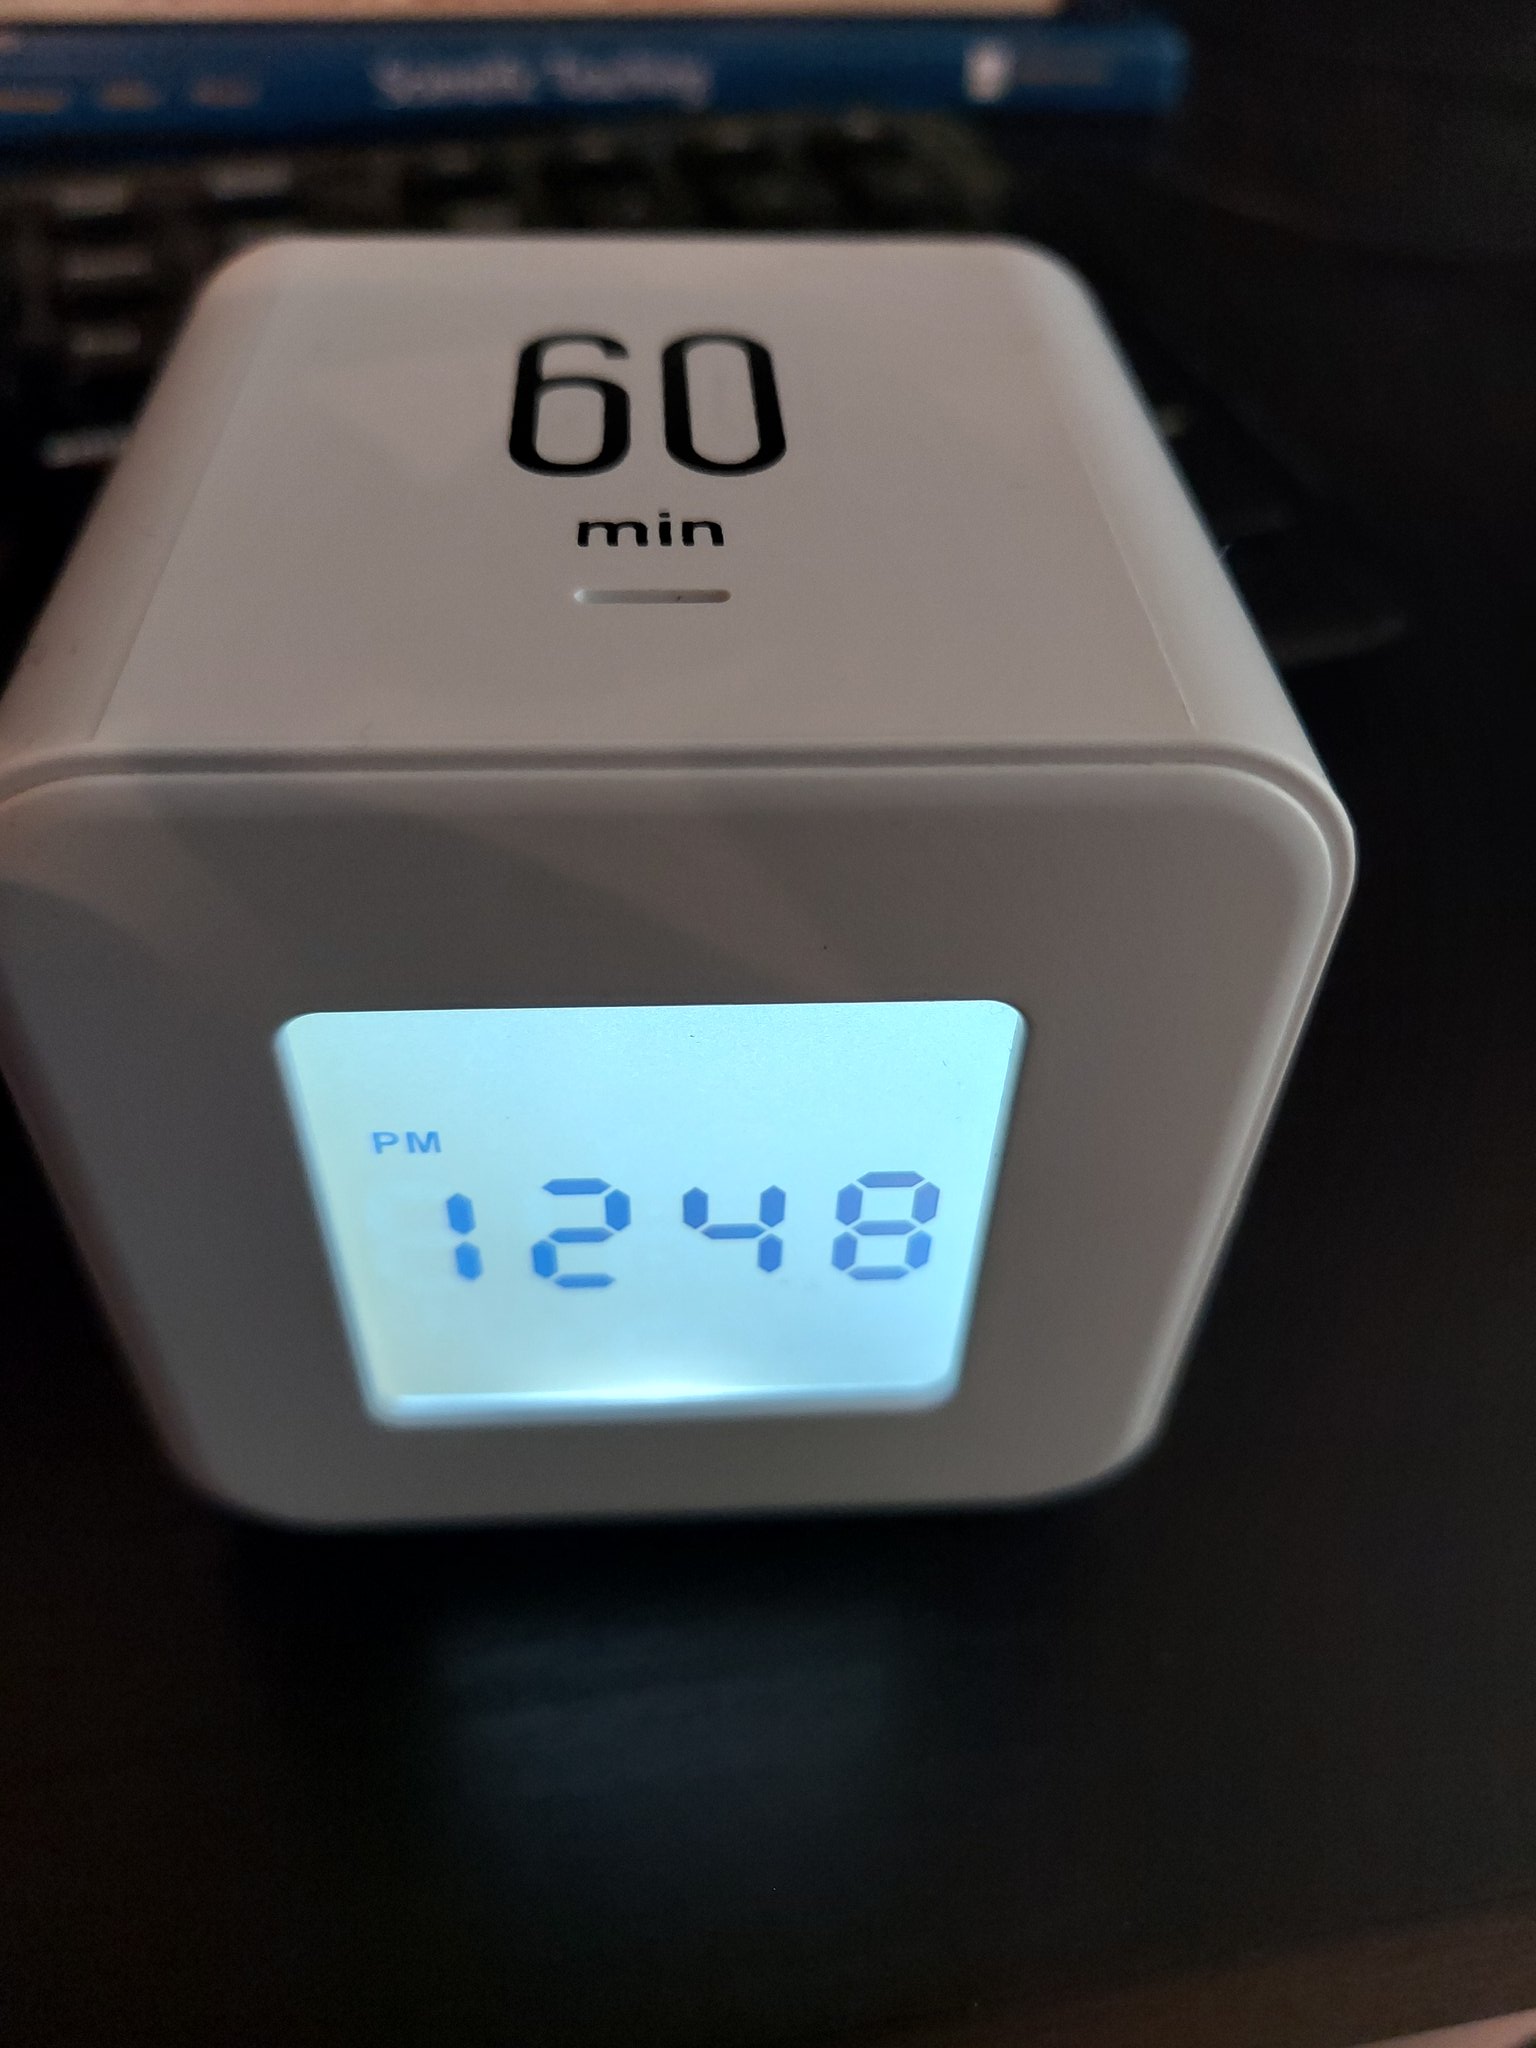 White cube clock/timer with 60 min on top of cube and 12:48 pm displayed on the clock face.